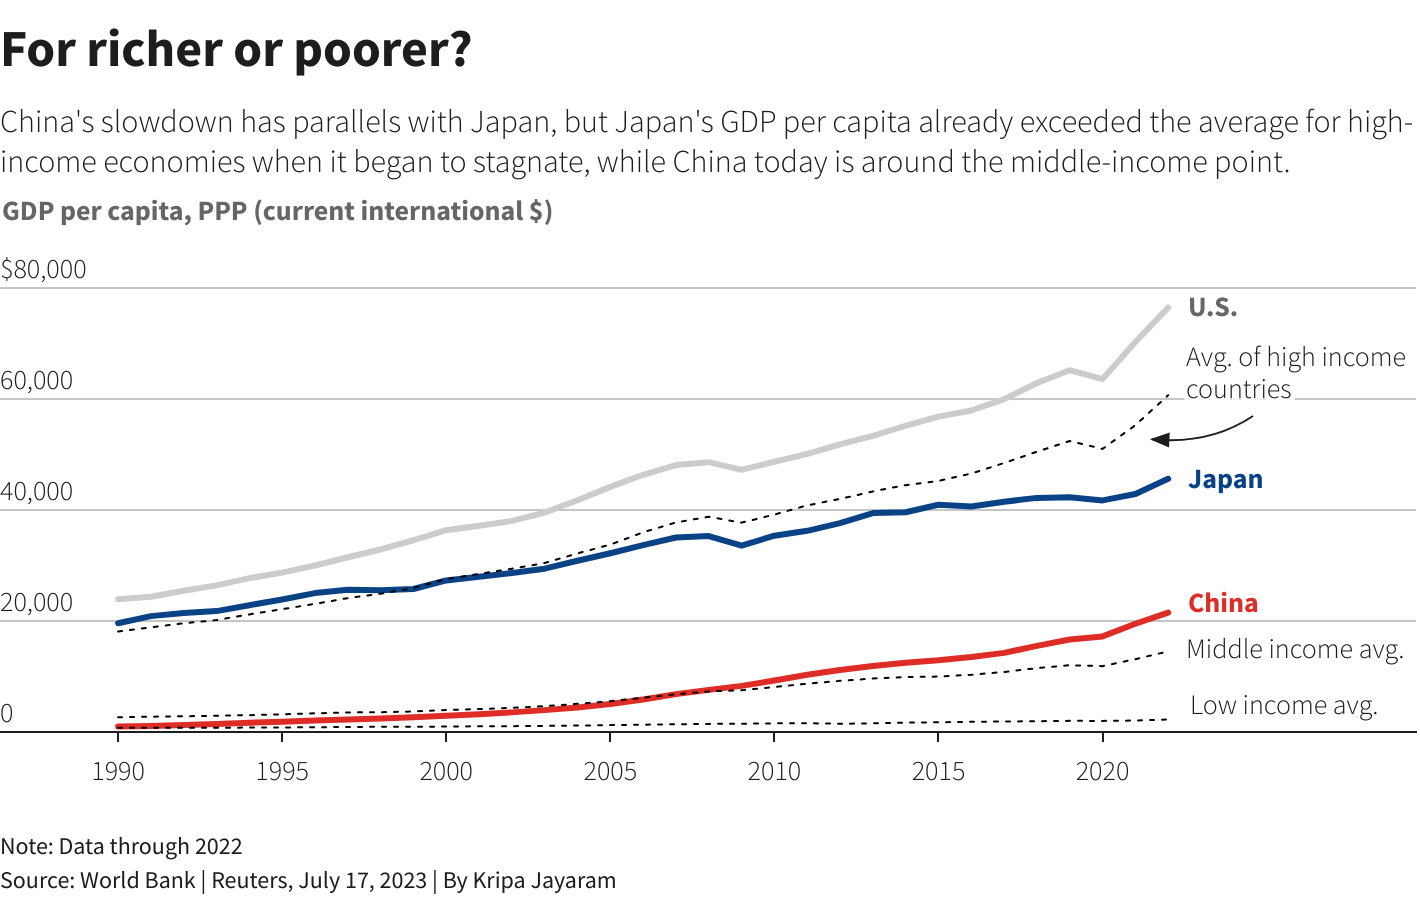 China's slowdown has parallels with Japan, but Japan's GDP per capita already exceeded the average for high income economies when it  began to stagnate.